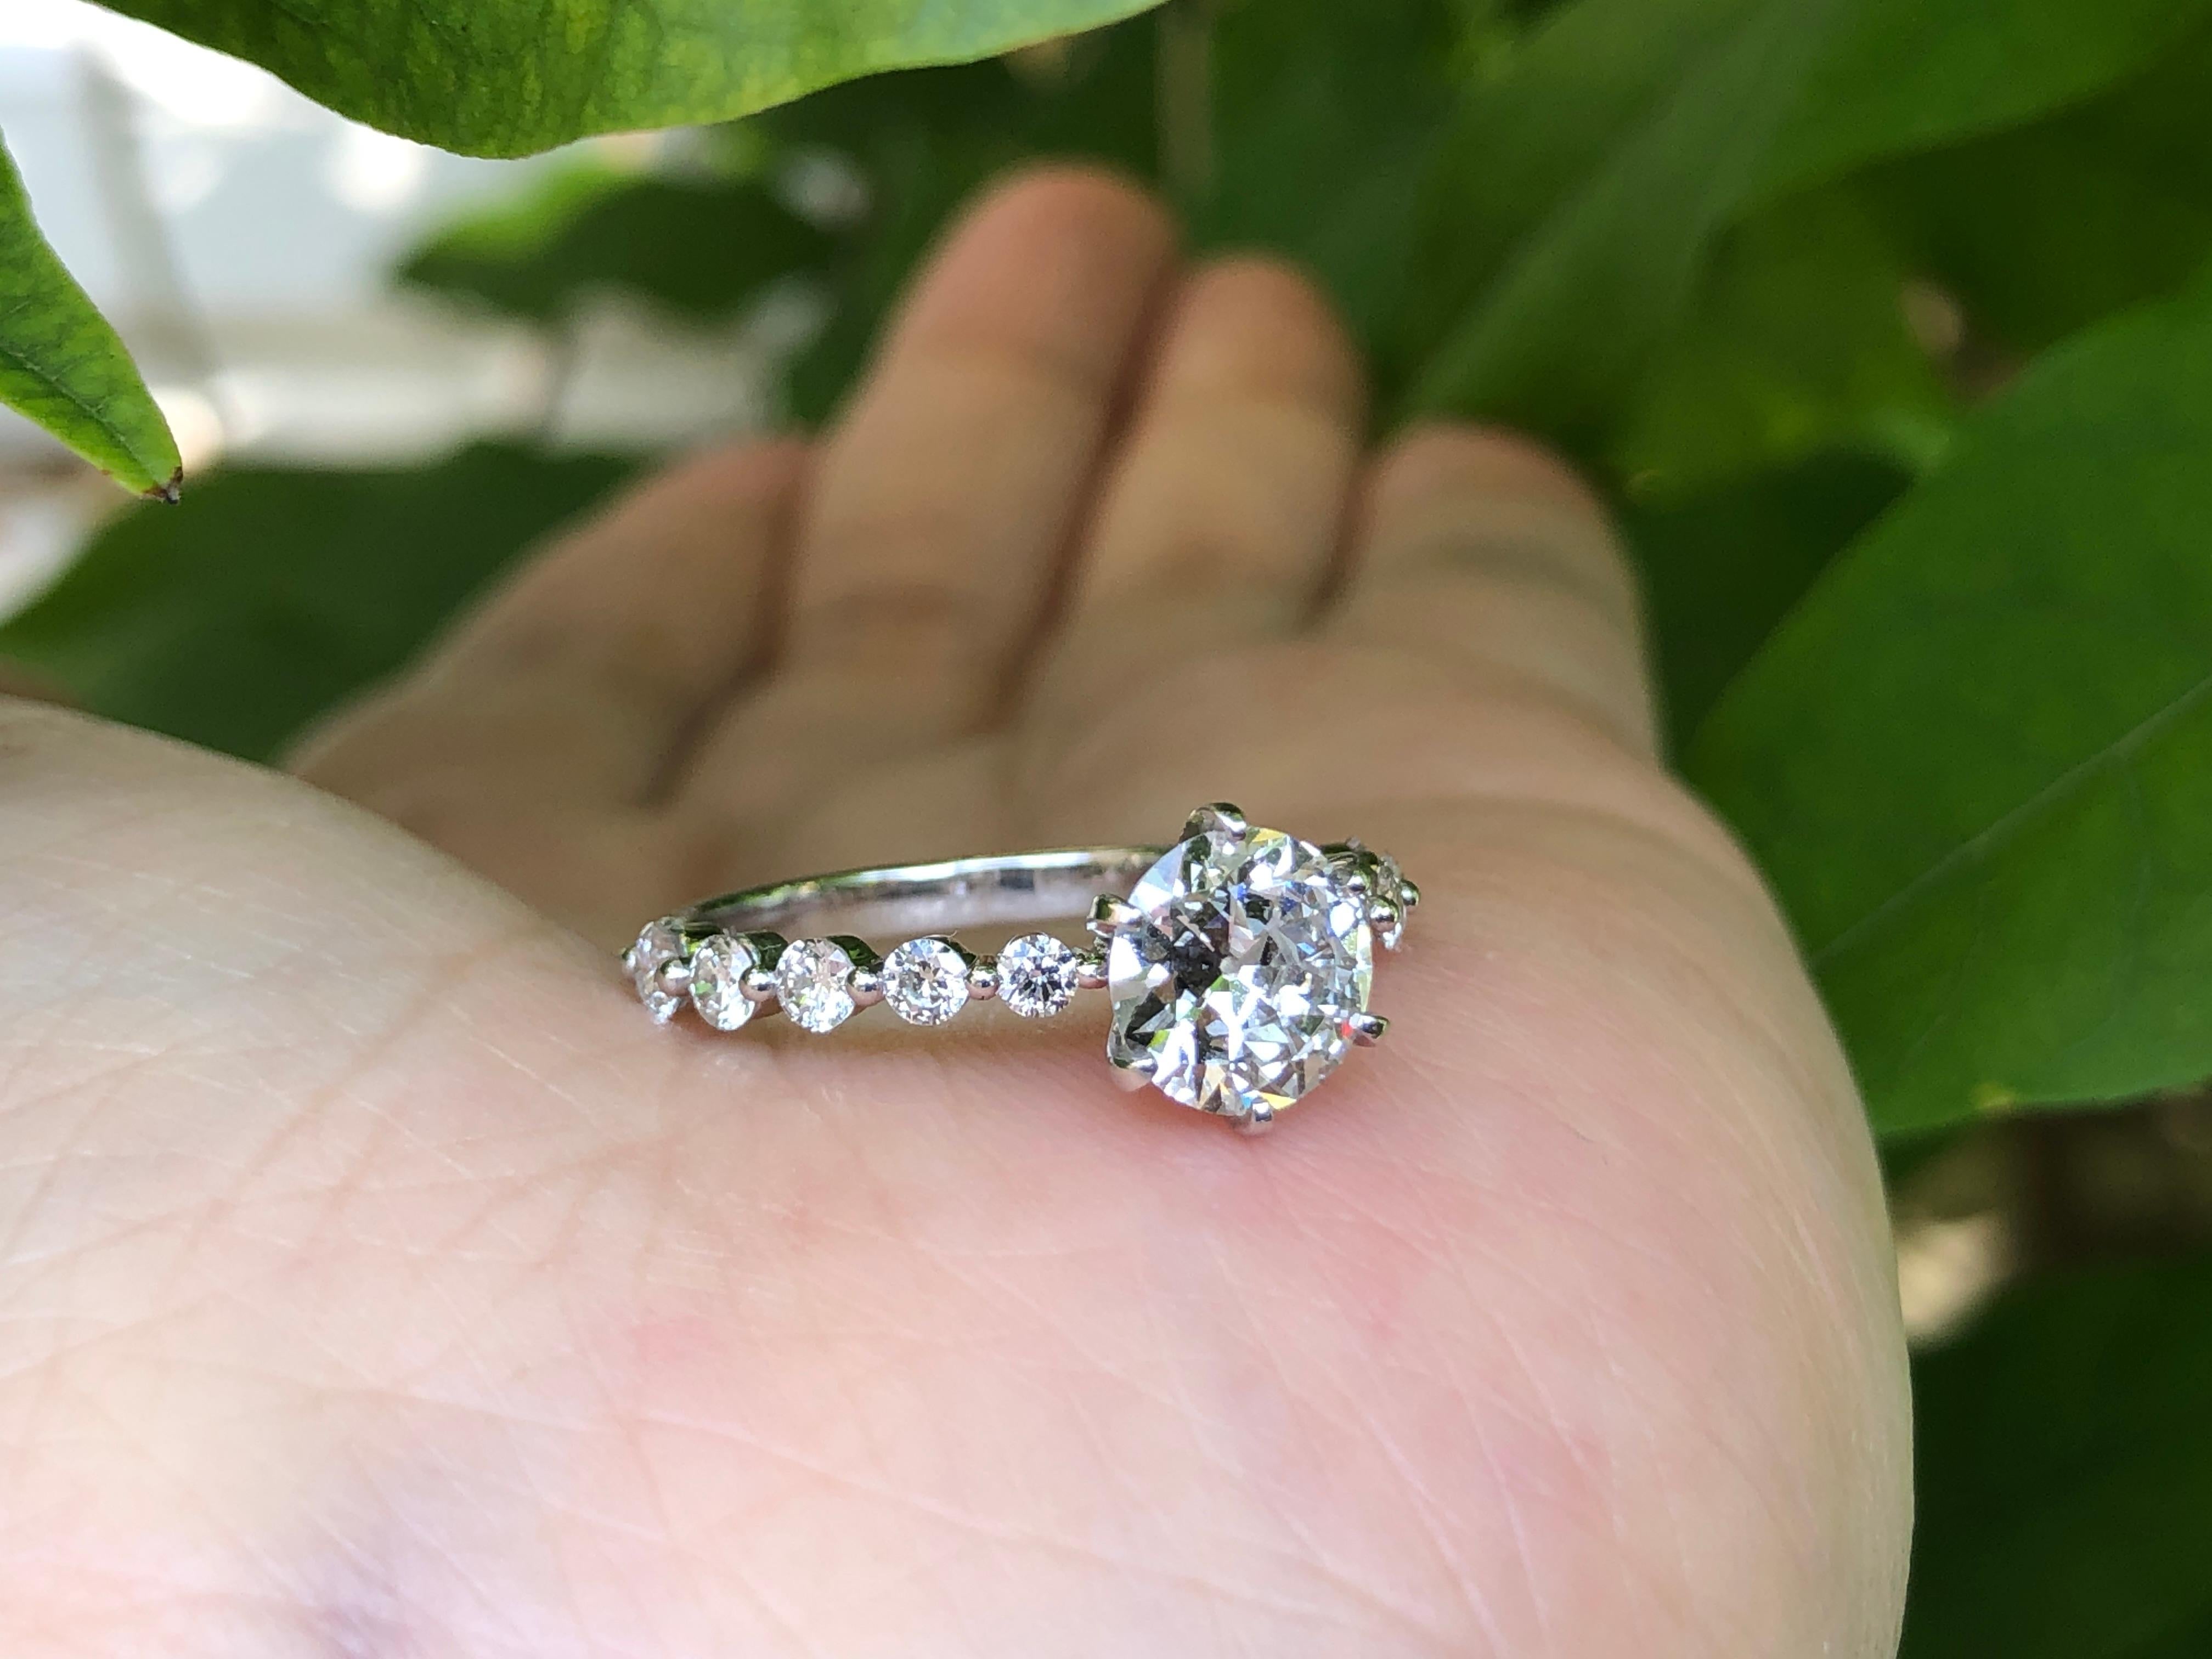 An unusual 18K white gold solitaire diamond ring that was in the 190s classic style. It has just under a carat brilliant old cut diamond in the centre. It is a good clear bright white stone with GIA certification. On either side set into the